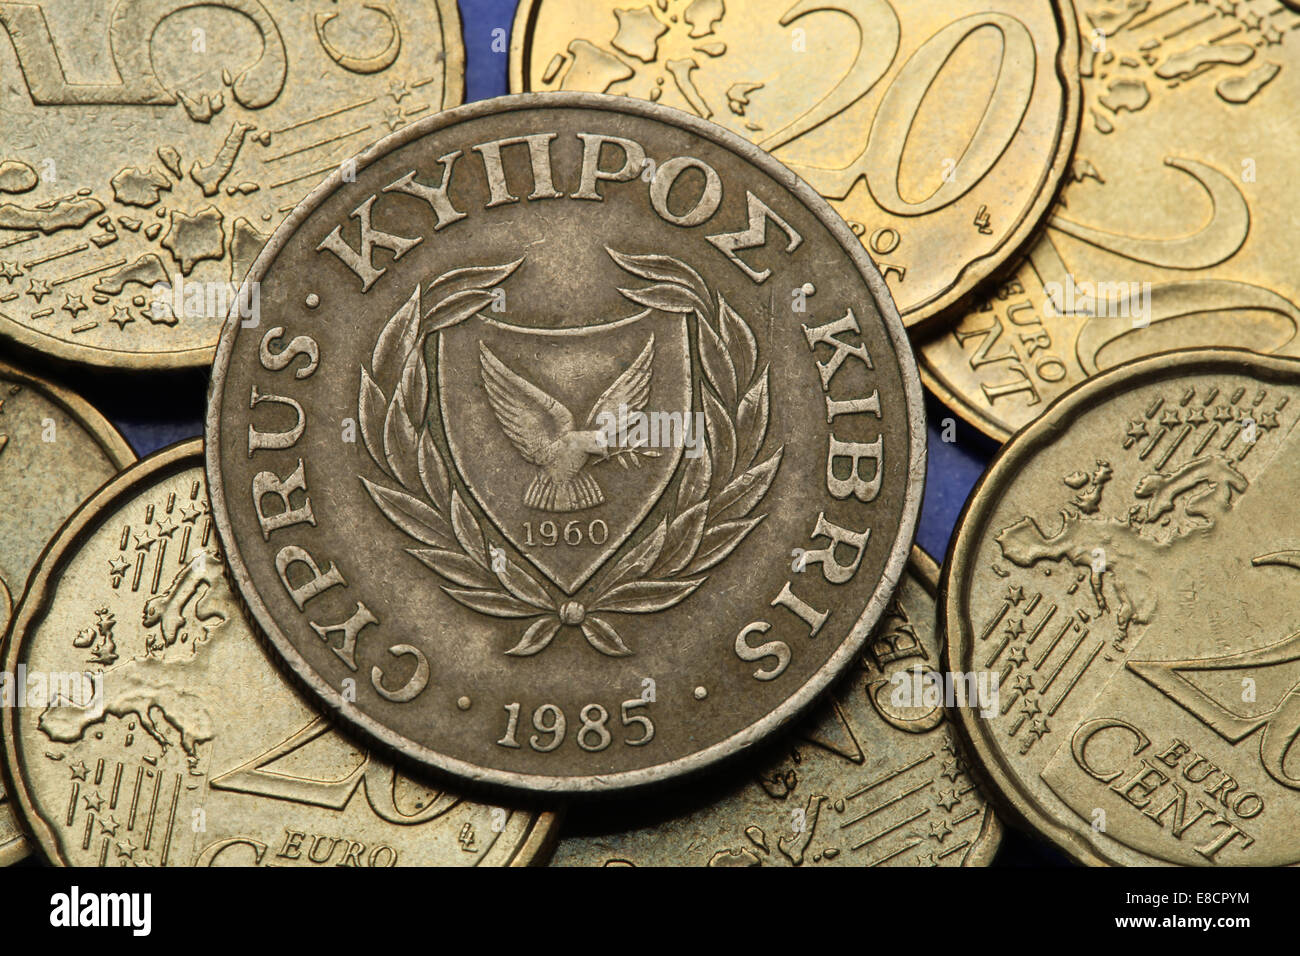 Coins of Cyprus. The coat of arms of the Republic of Cyprus depicted in the old Cypriot cent coins. Stock Photo